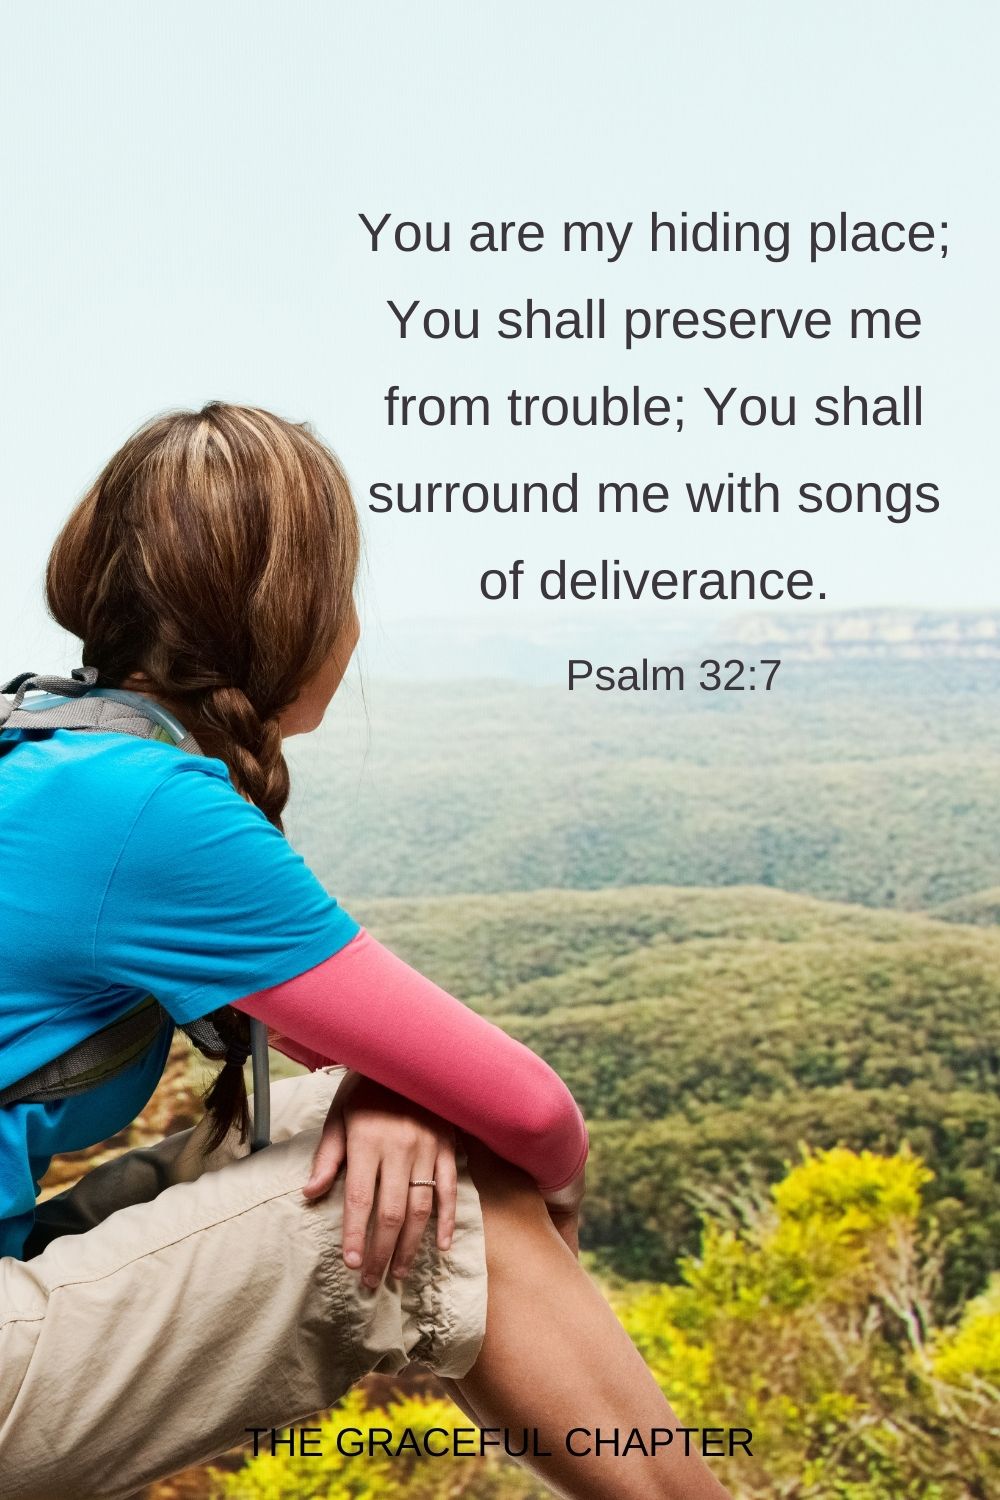 You are my hiding place; You shall preserve me from trouble; You shall surround me with songs of deliverance. Psalm 32:7